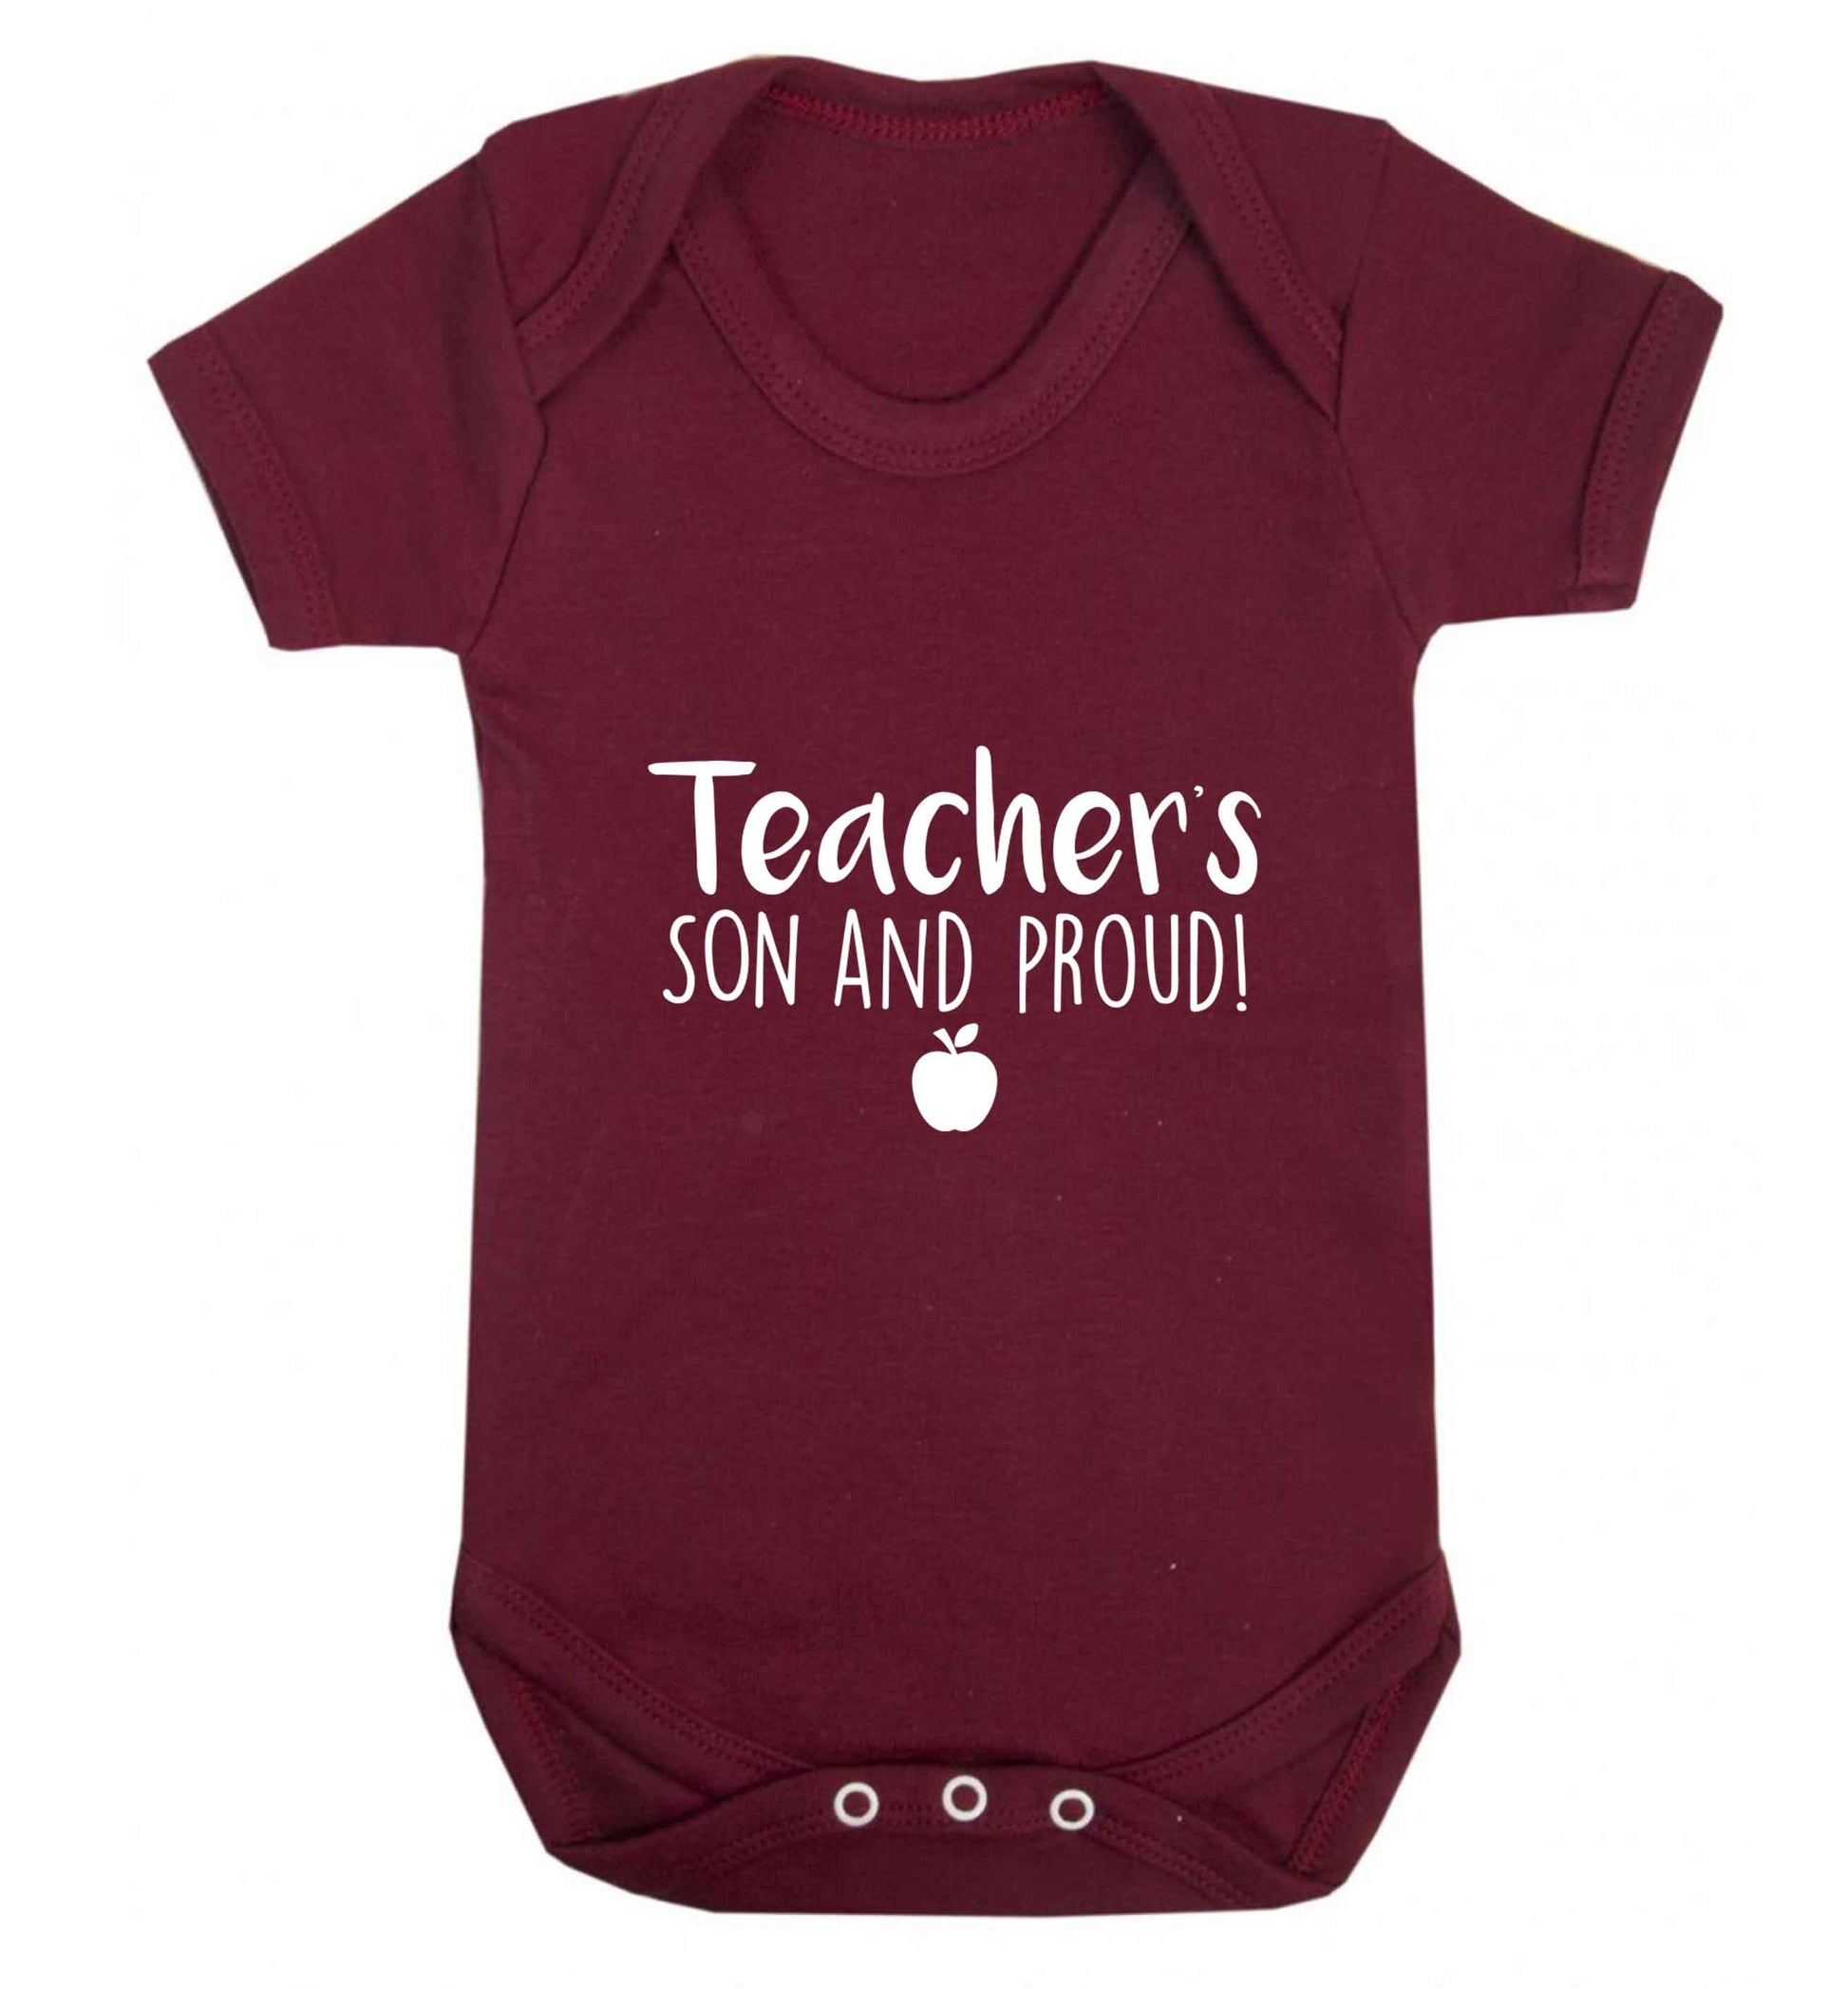 Teachers son and proud baby vest maroon 18-24 months